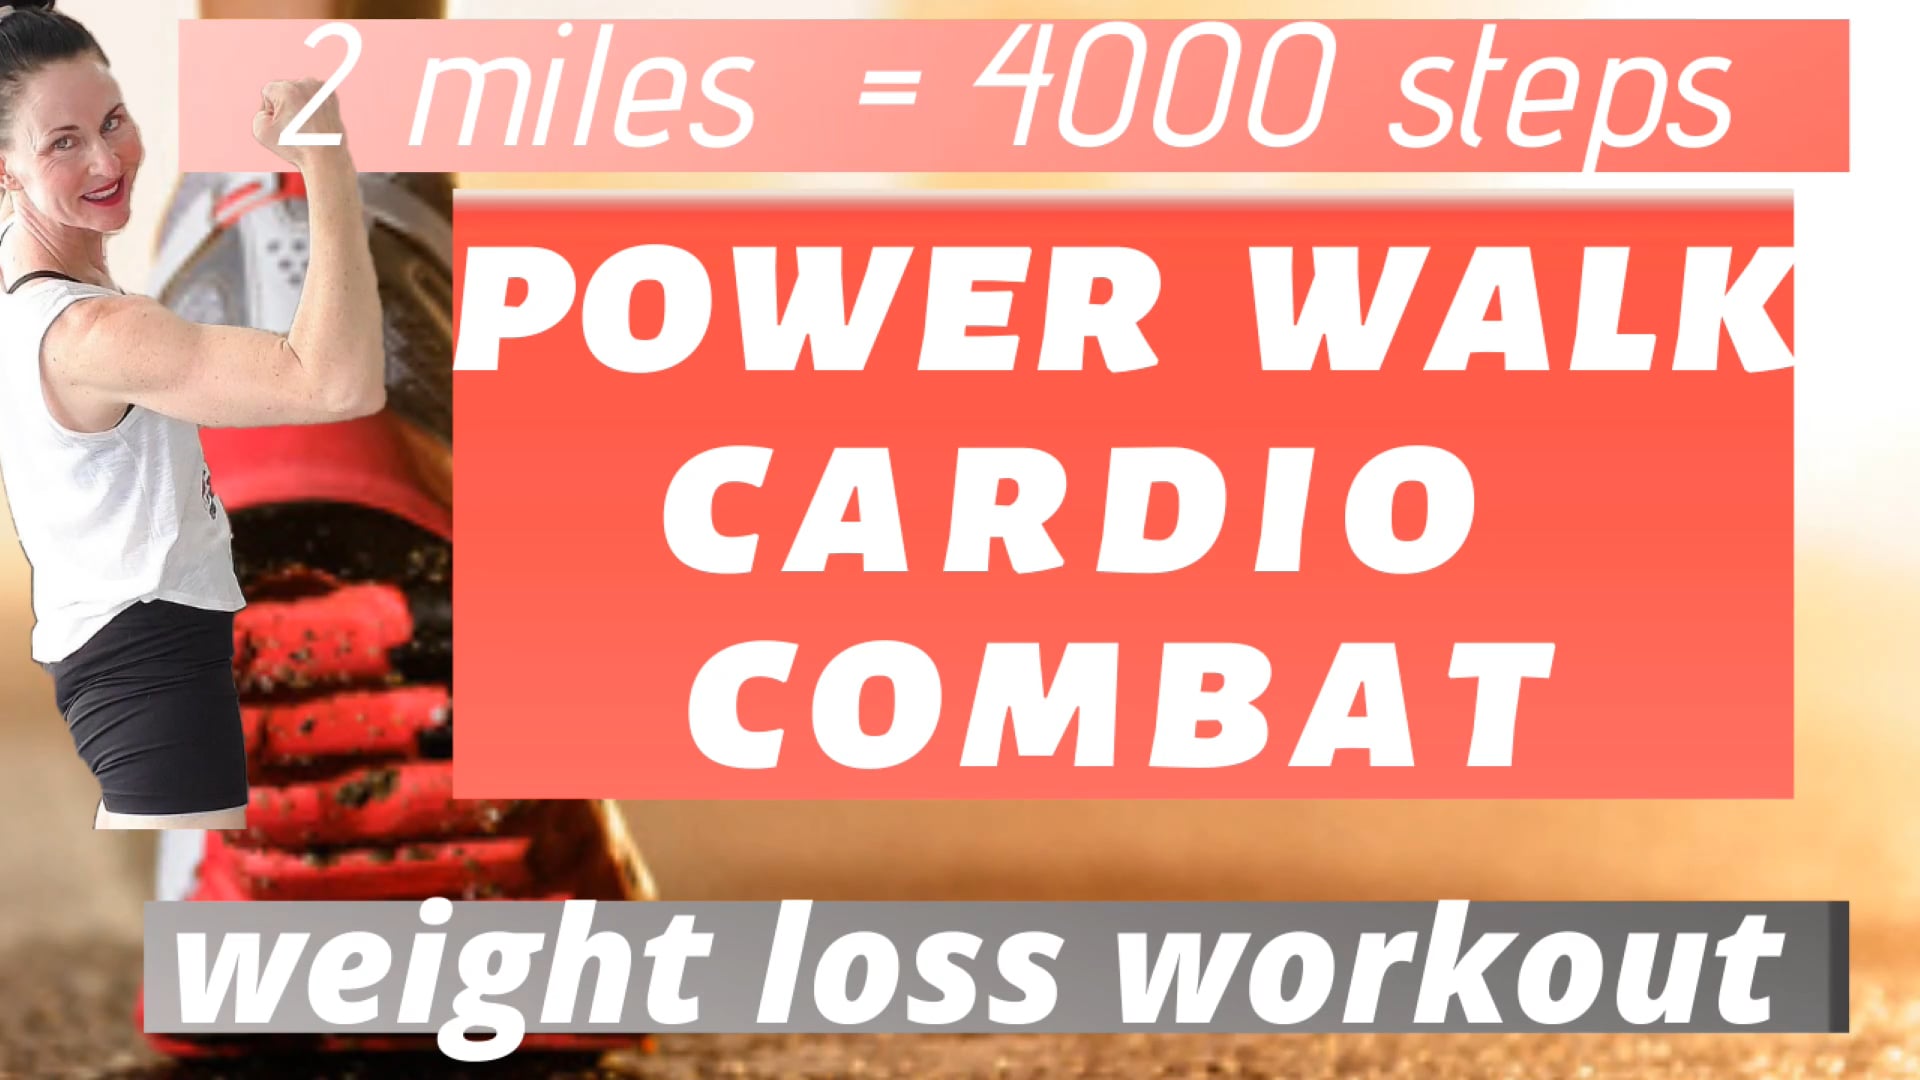 50 MINUTE WORKOUT |2 MILE  POWER WALK CARDIO COMBAT |INDOOR WALK AT HOME |WALK FOR WEIGHT LOSS